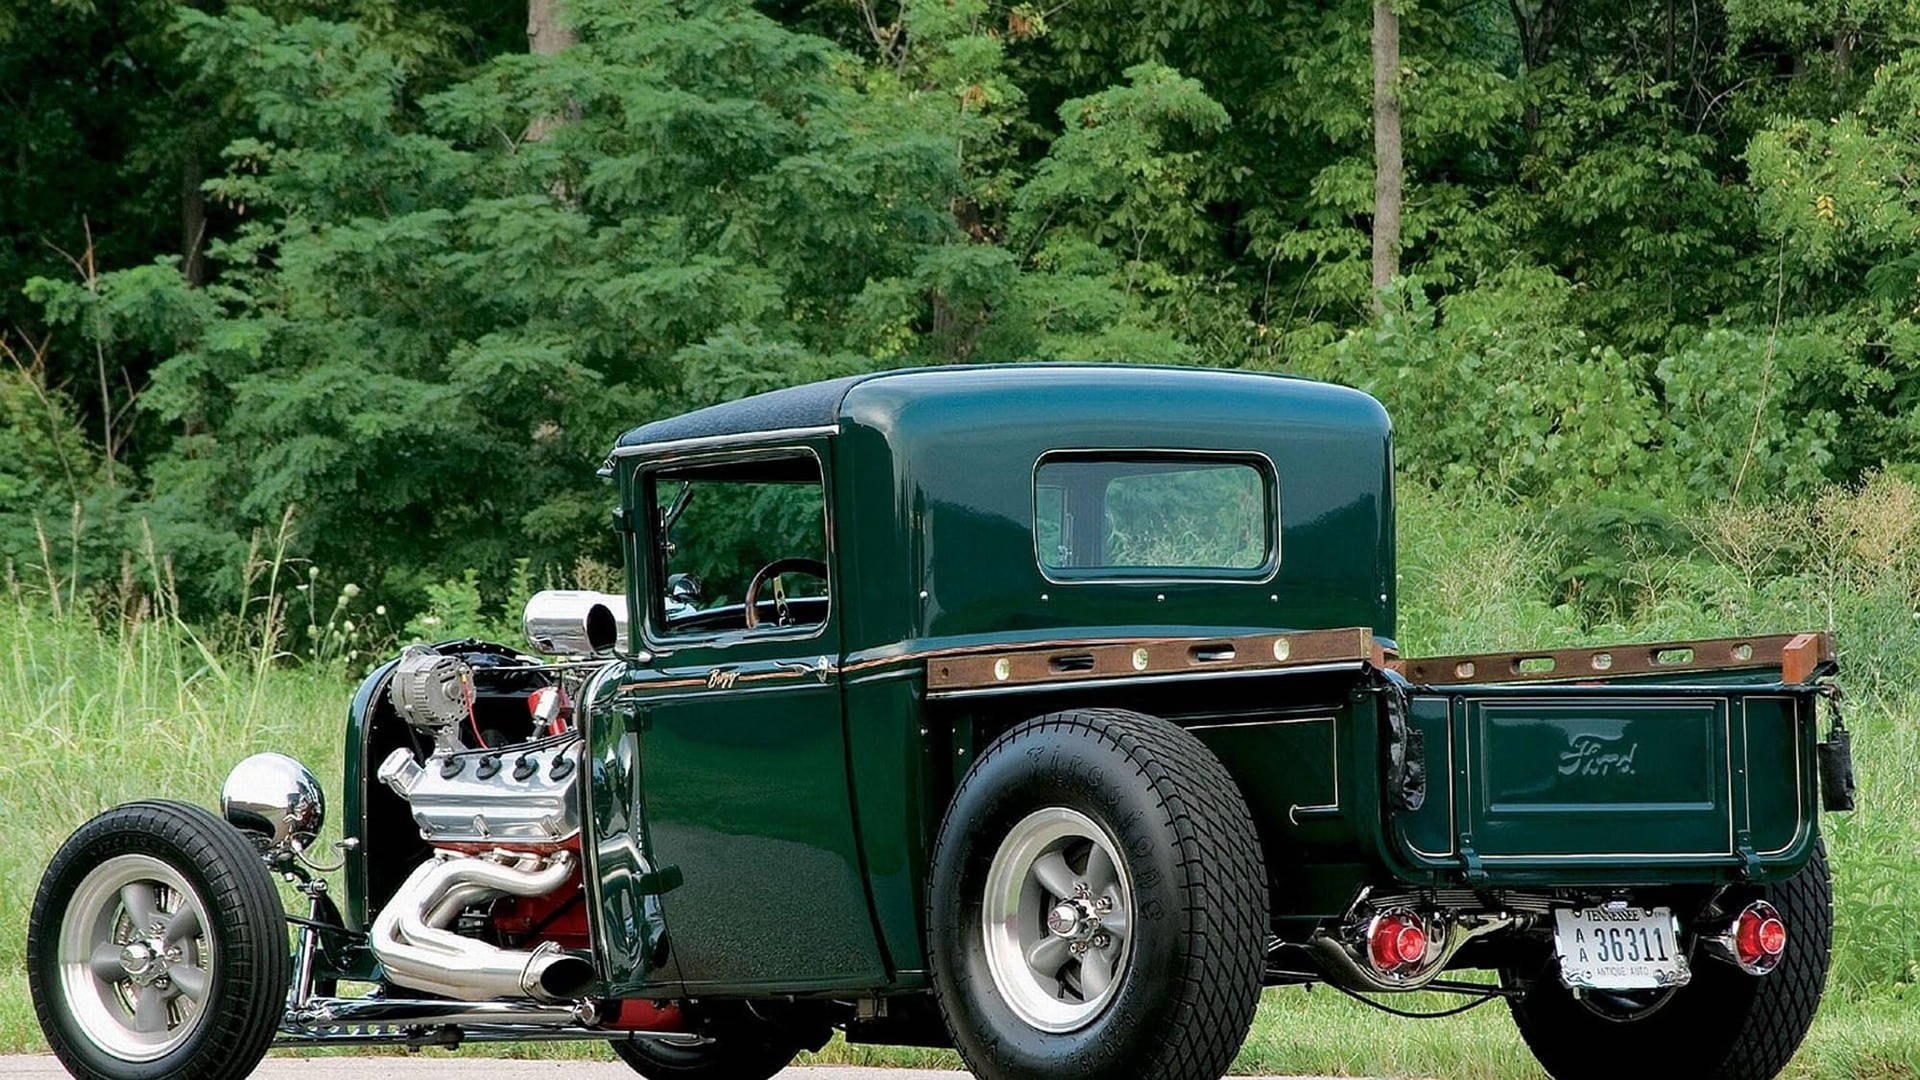 Vintage Charm: Rustic Old Ford Truck Rat Rod